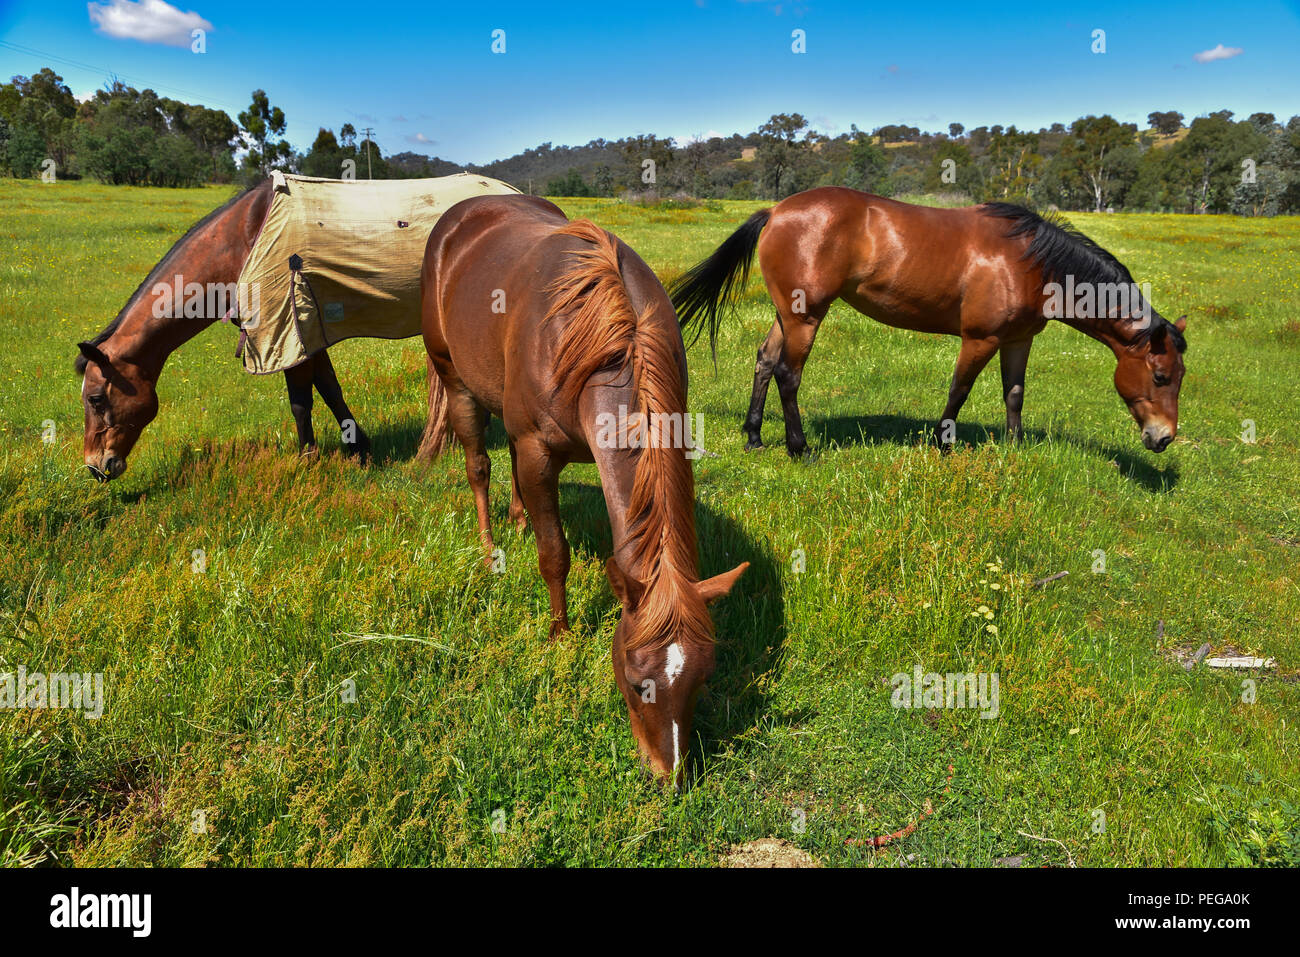 Horse eating grass in a farm Stock Photo